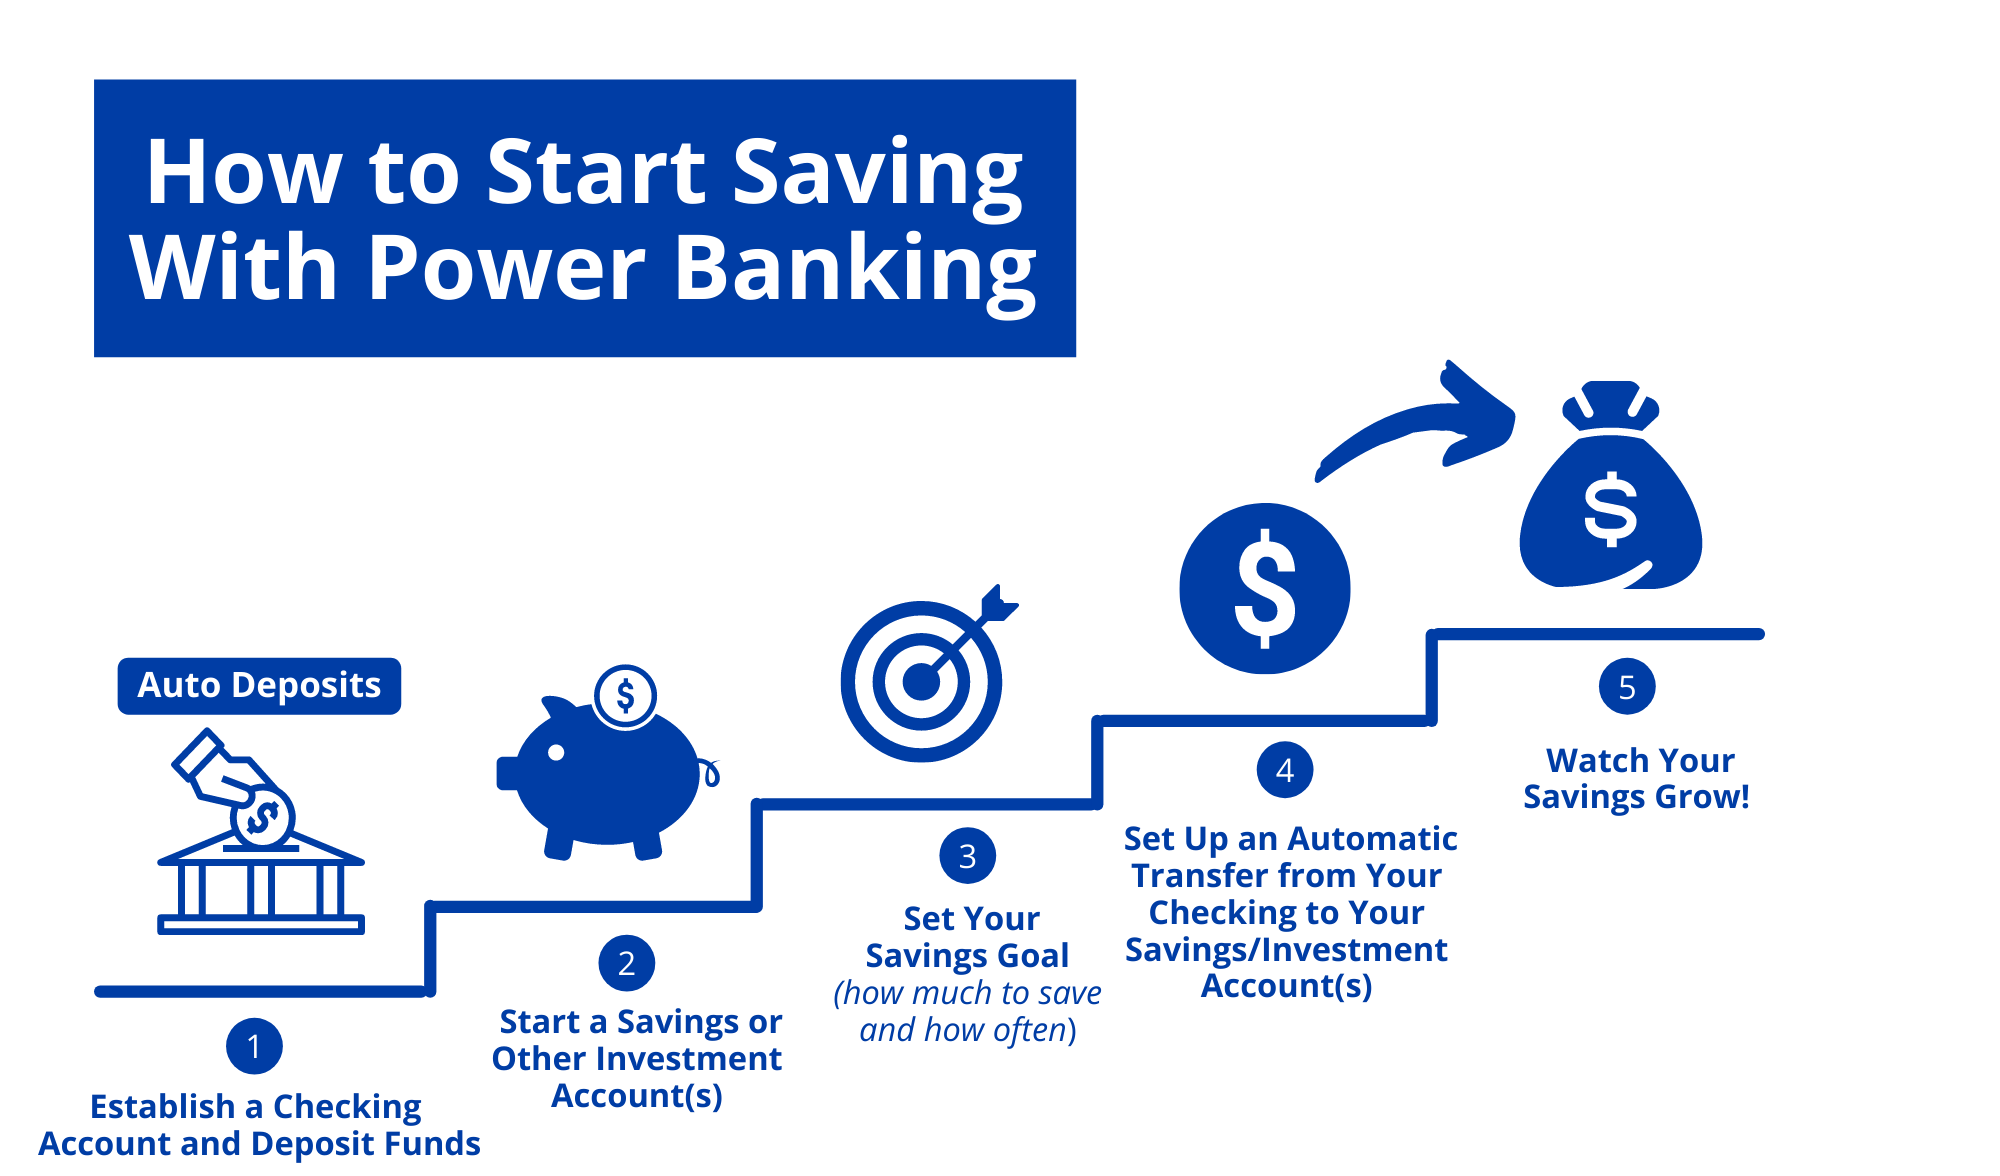 How to Start Saving with Power Banking illustration